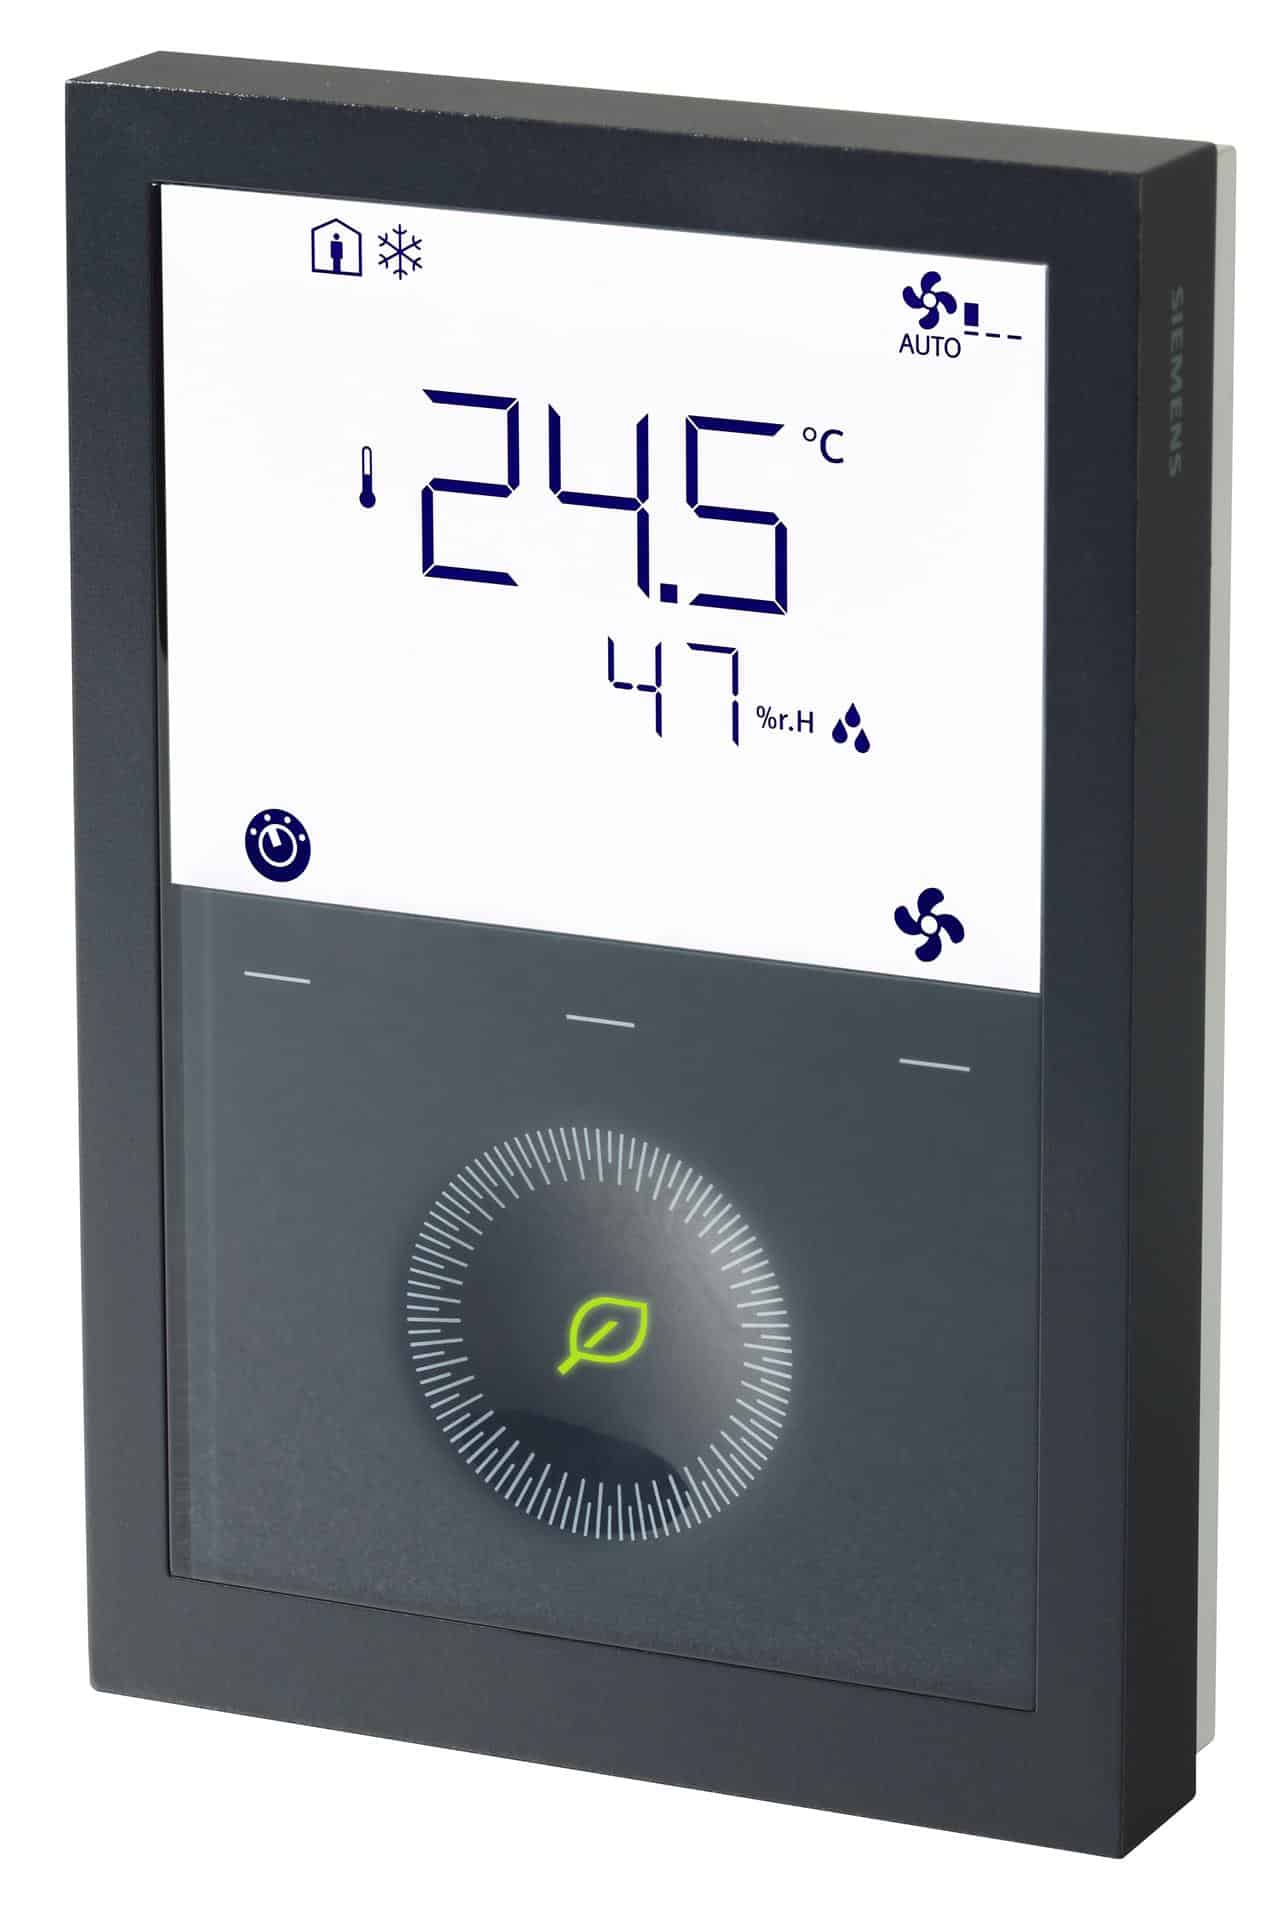 RDG260KN/BK KNX communicating room thermostat in black. Outputs modulating (DC) or on/off. Fan coil (3-speed / DC fan)